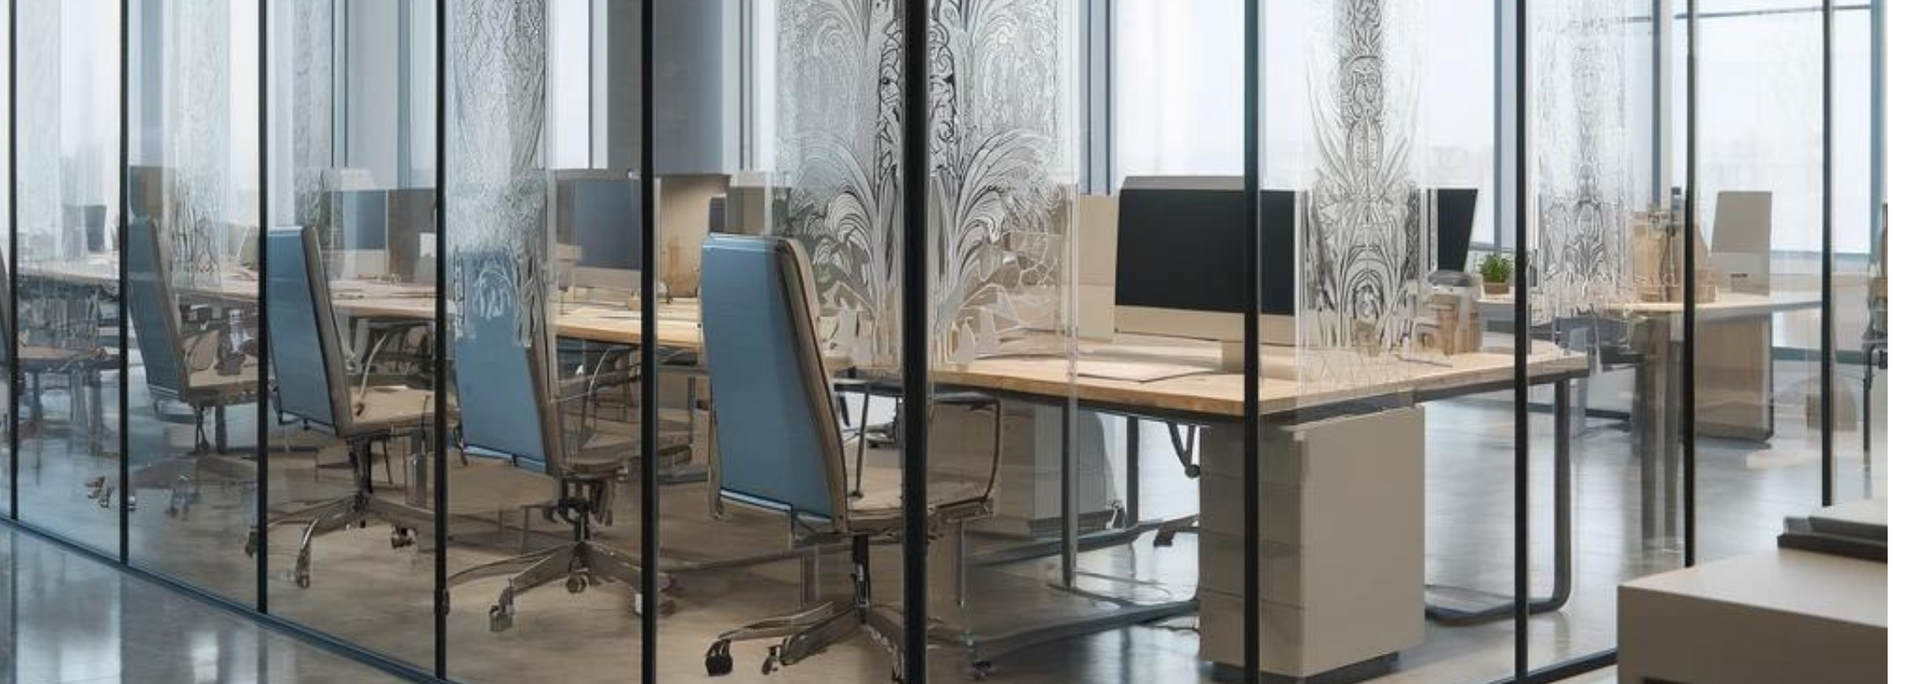 Picture of a printed glass office partition.